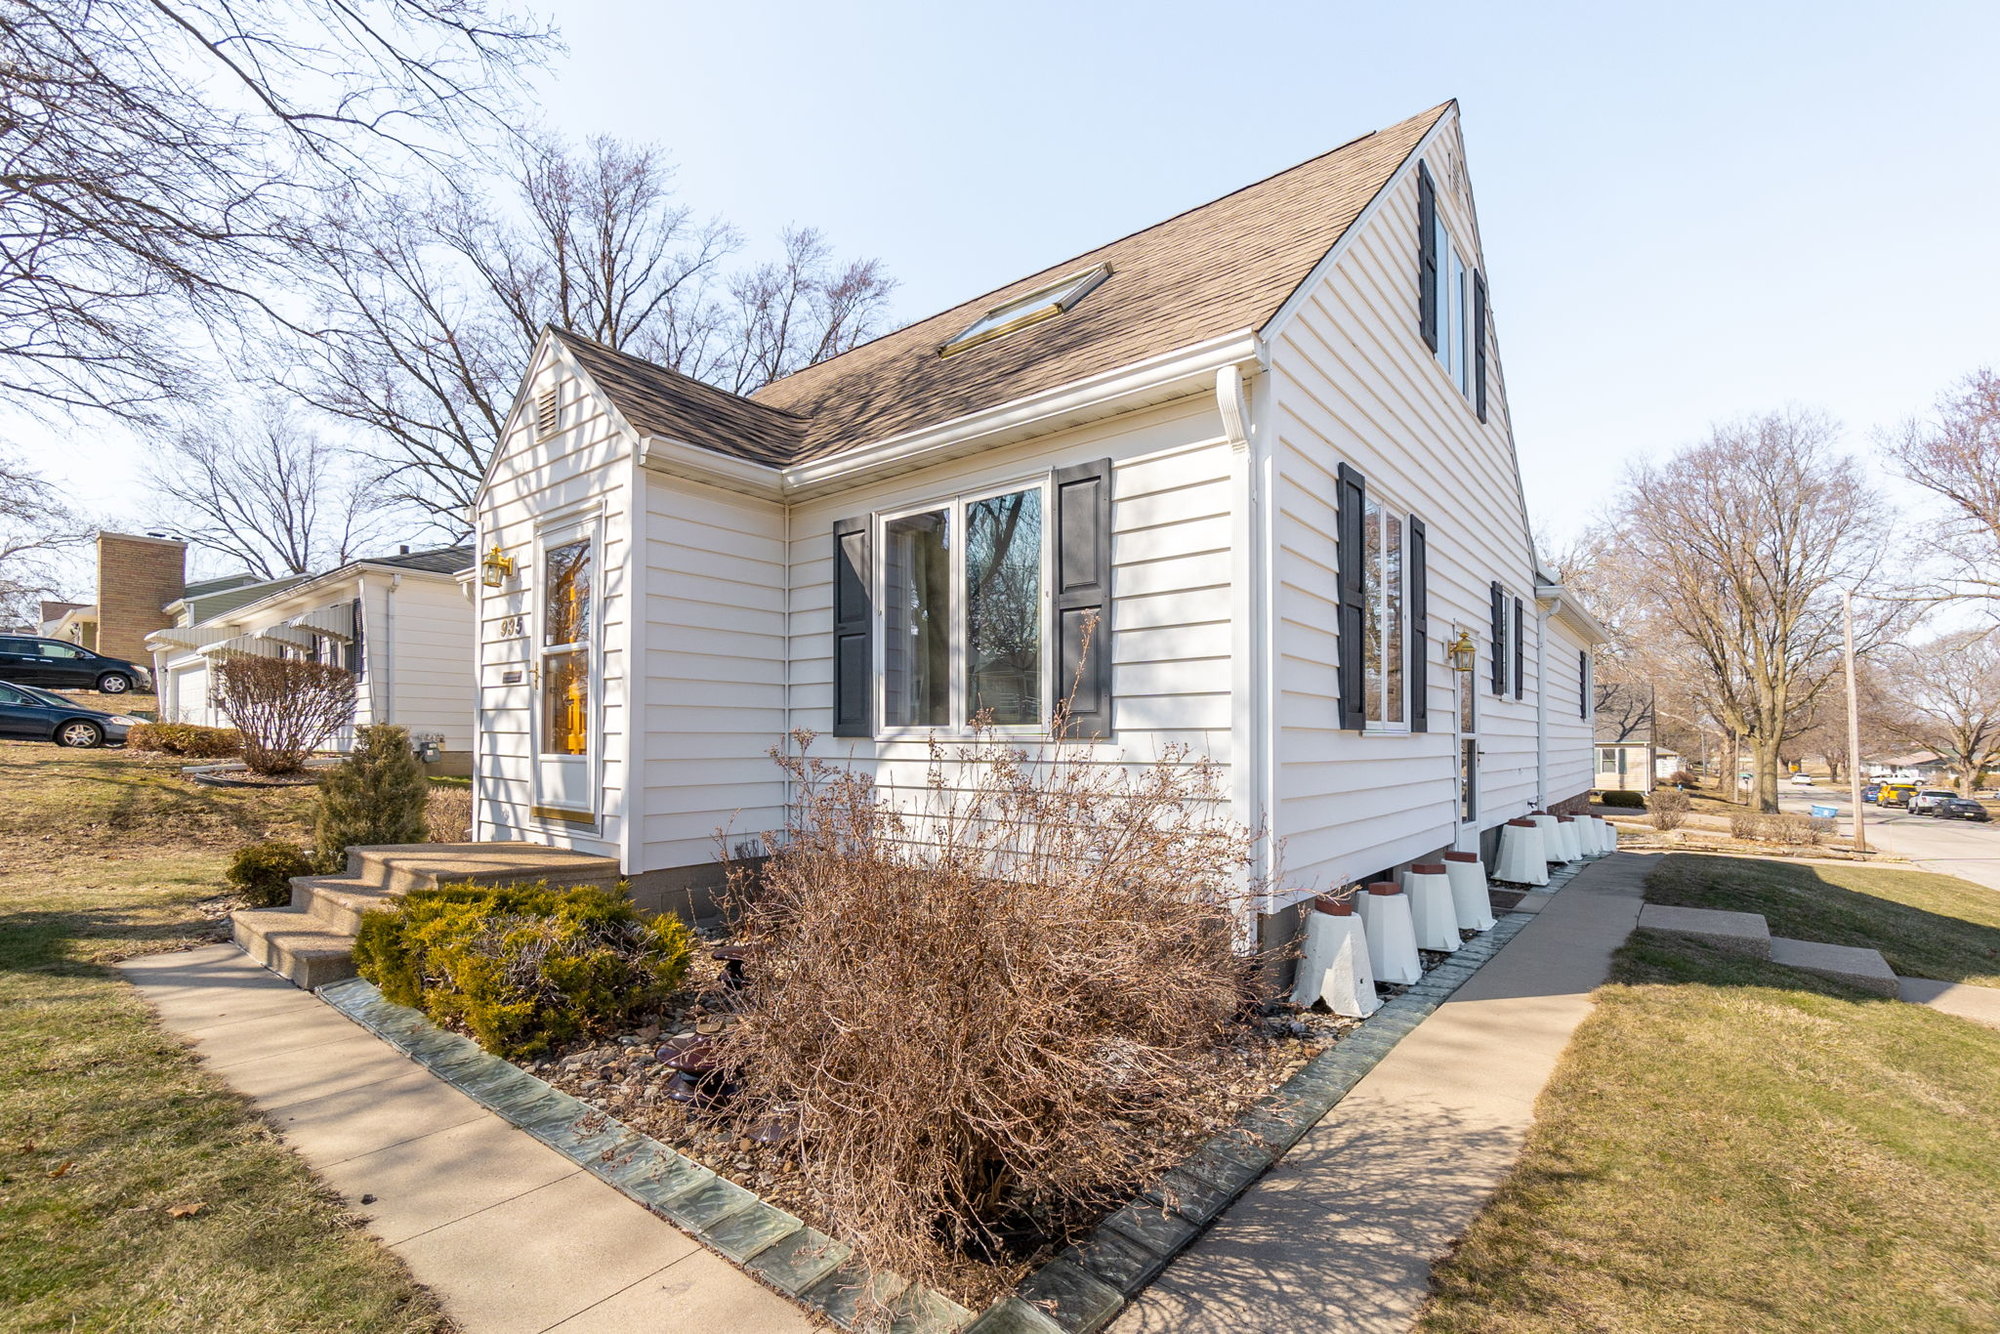 Loved Since 1962. This Waterloo Home is More than Meets the Eye.